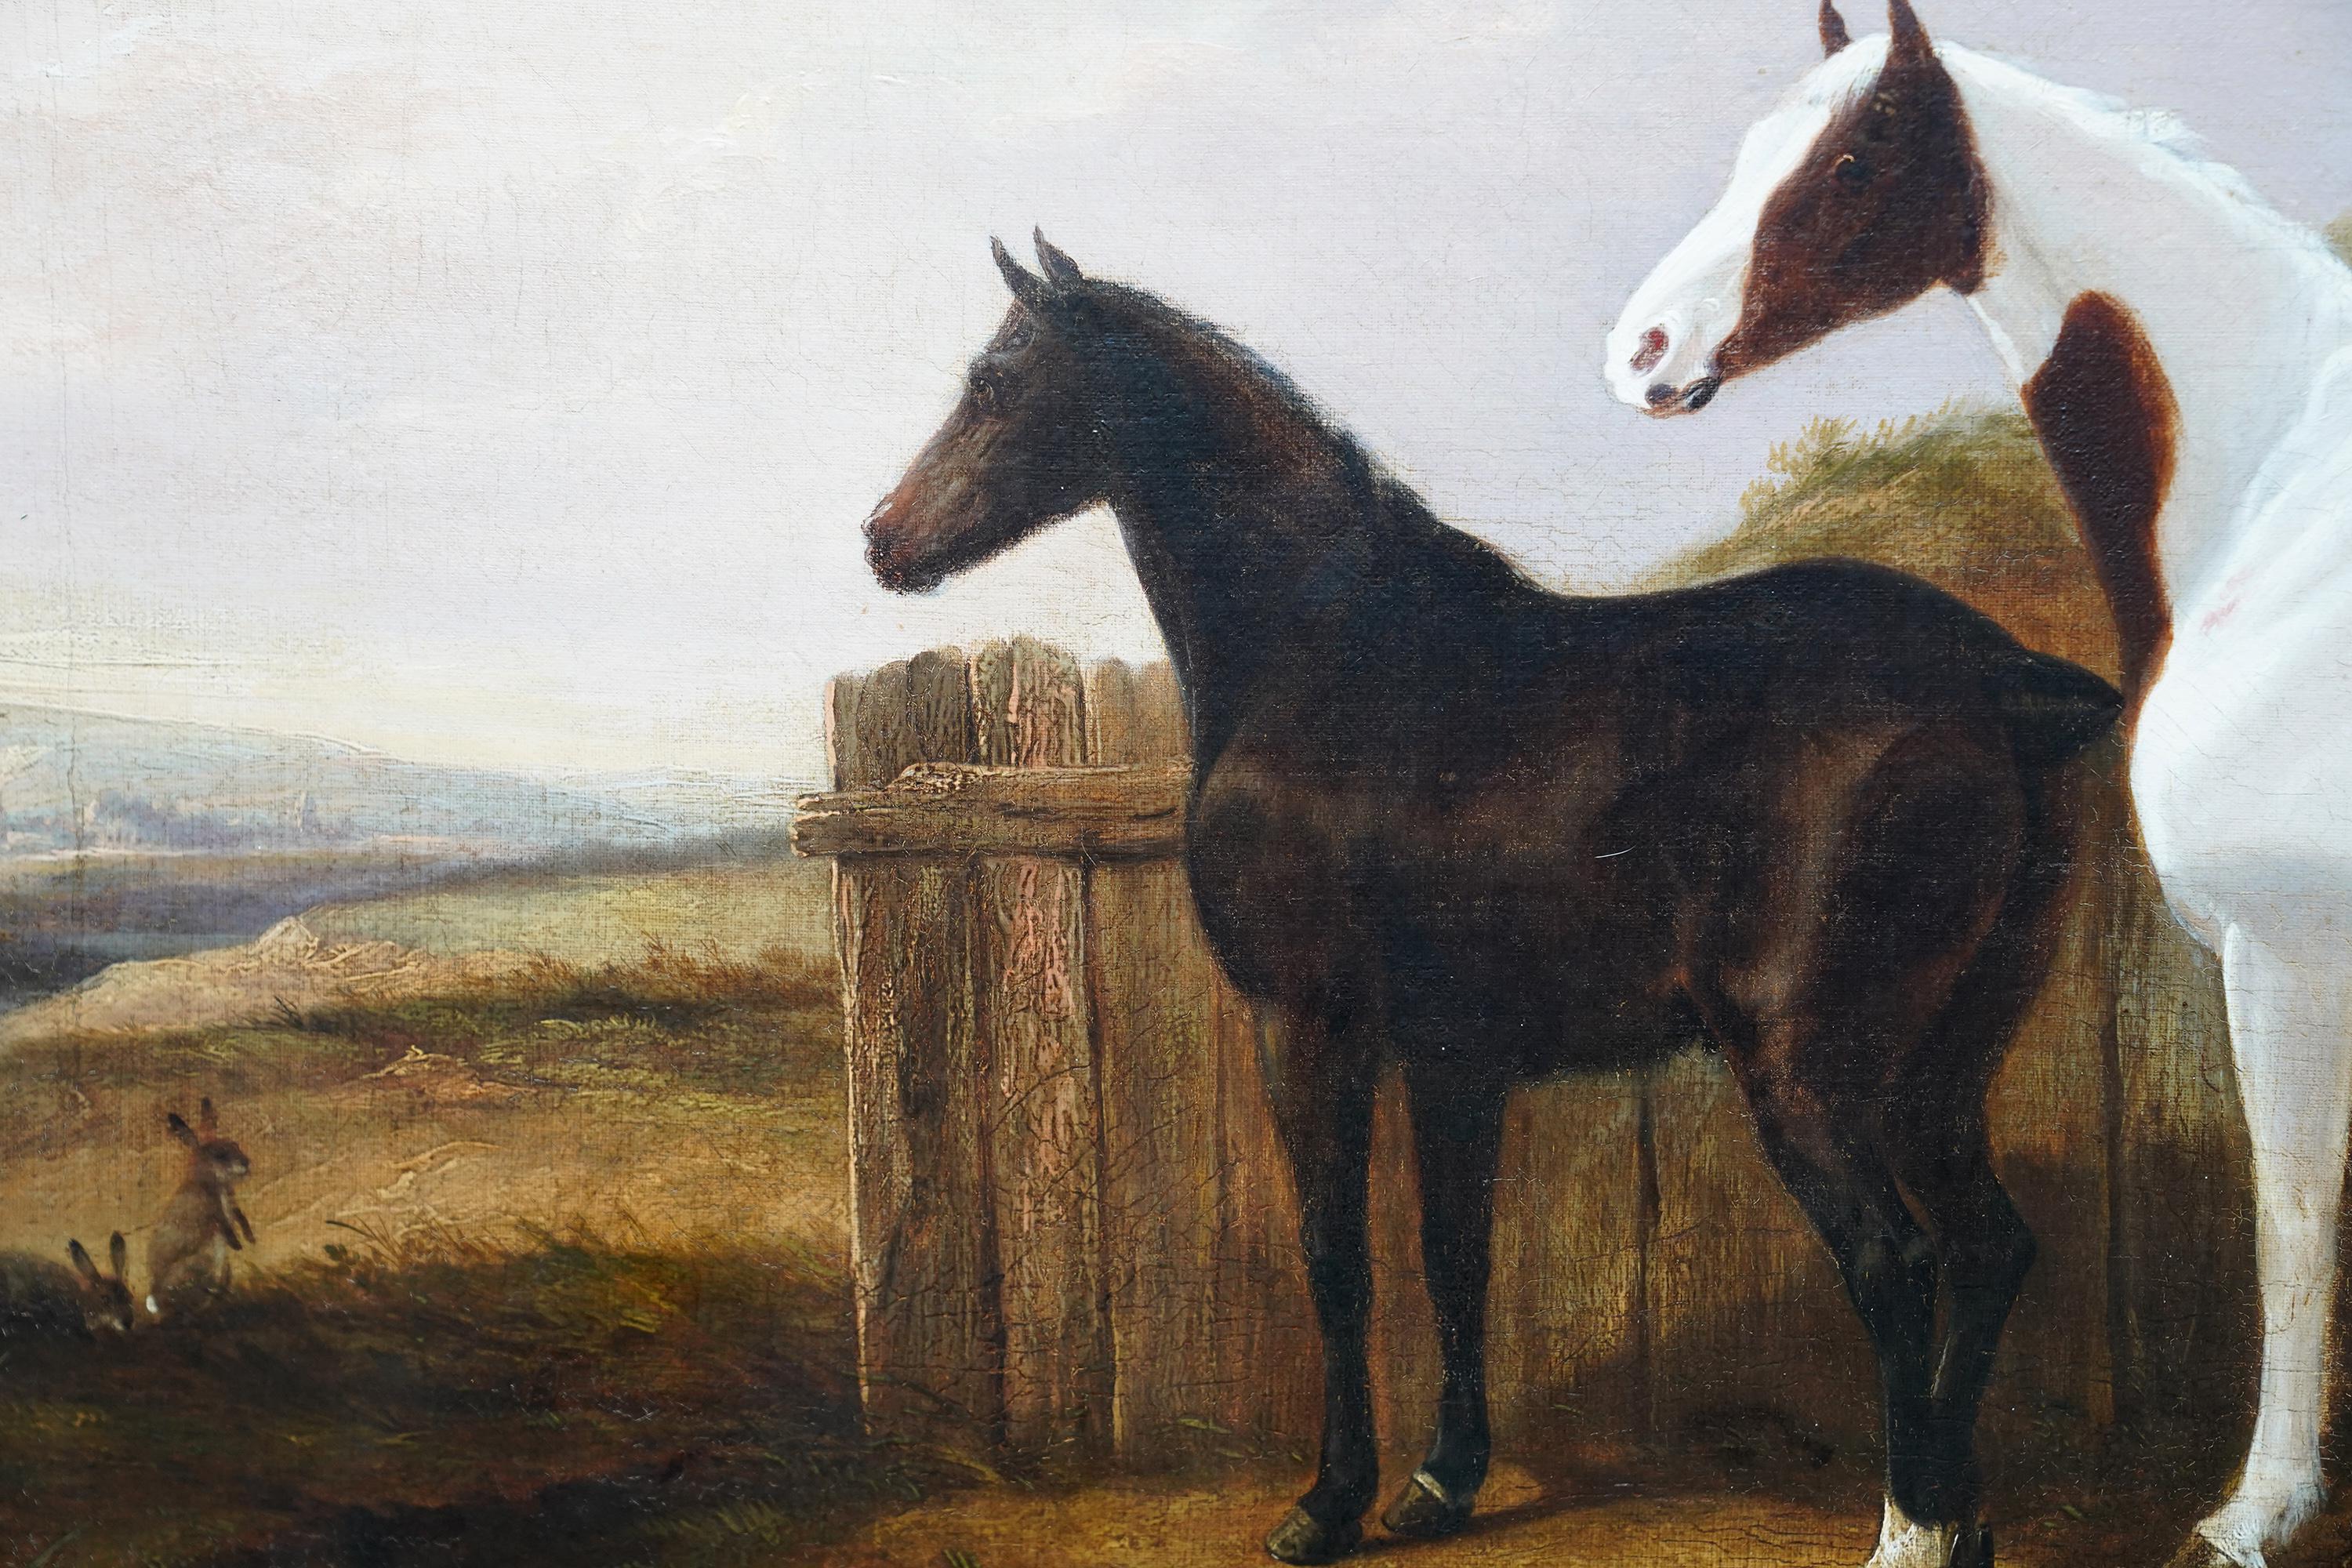 This lovely British Victorian oil painting is attributed noted landscape and animal artist George Cole ans ascribed verso. Painted in 1840 it is a superb portrait of two horses, one dark brown one piebald. They are stood in the foreground in front